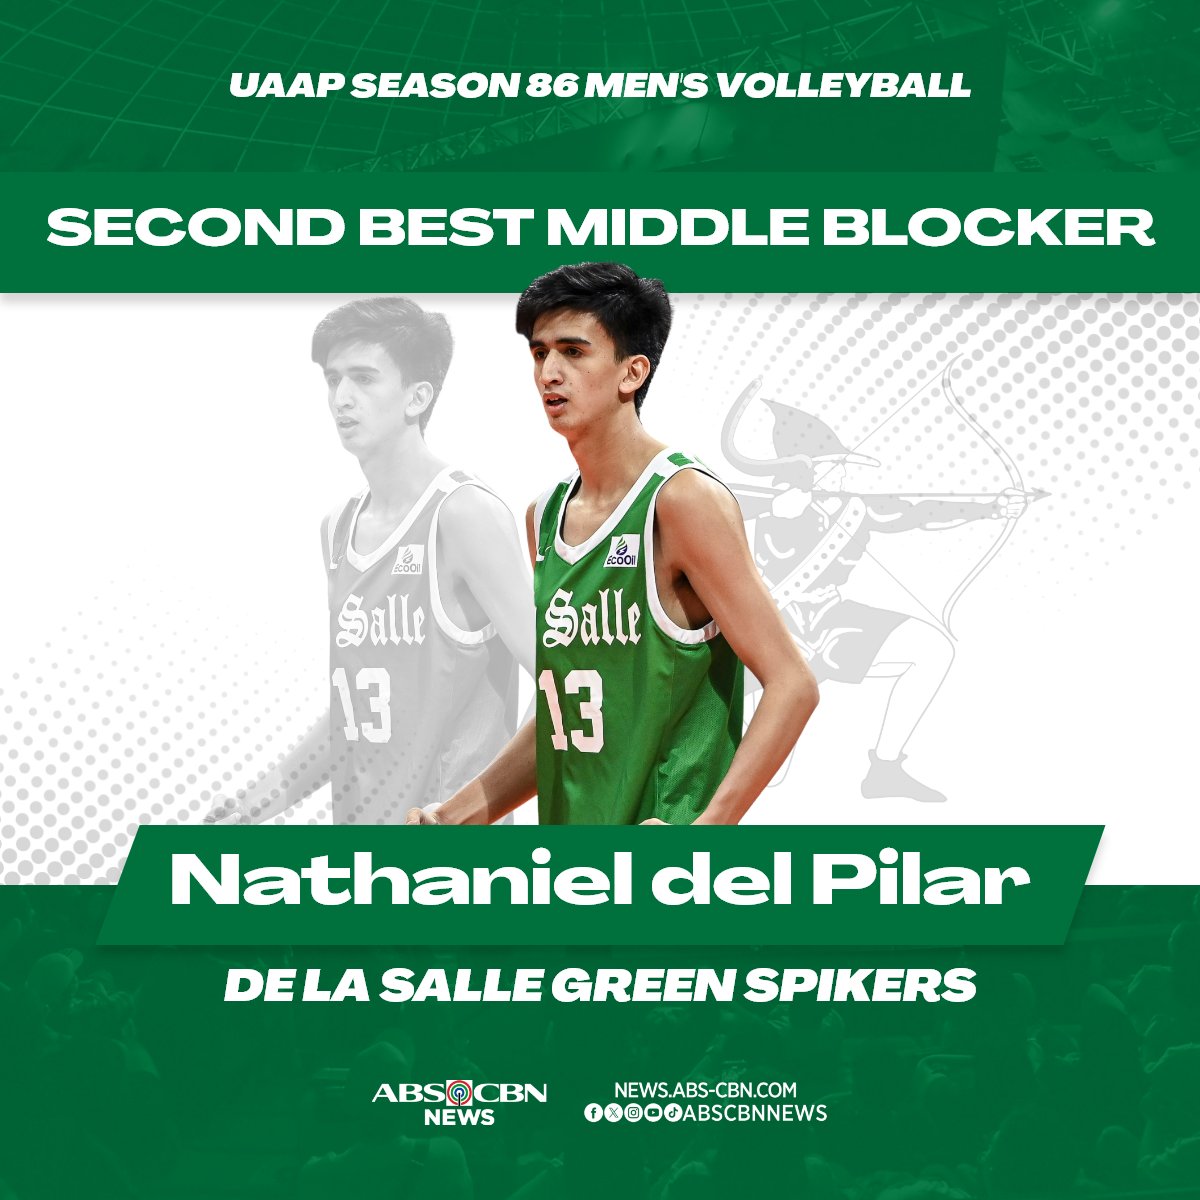 Congratulations to De La Salle University’s Nathaniel del Pilar for being awarded as the #UAAPSeason86 men’s volleyball tournament Second Best Middle Blocker! | via @romwelanzures